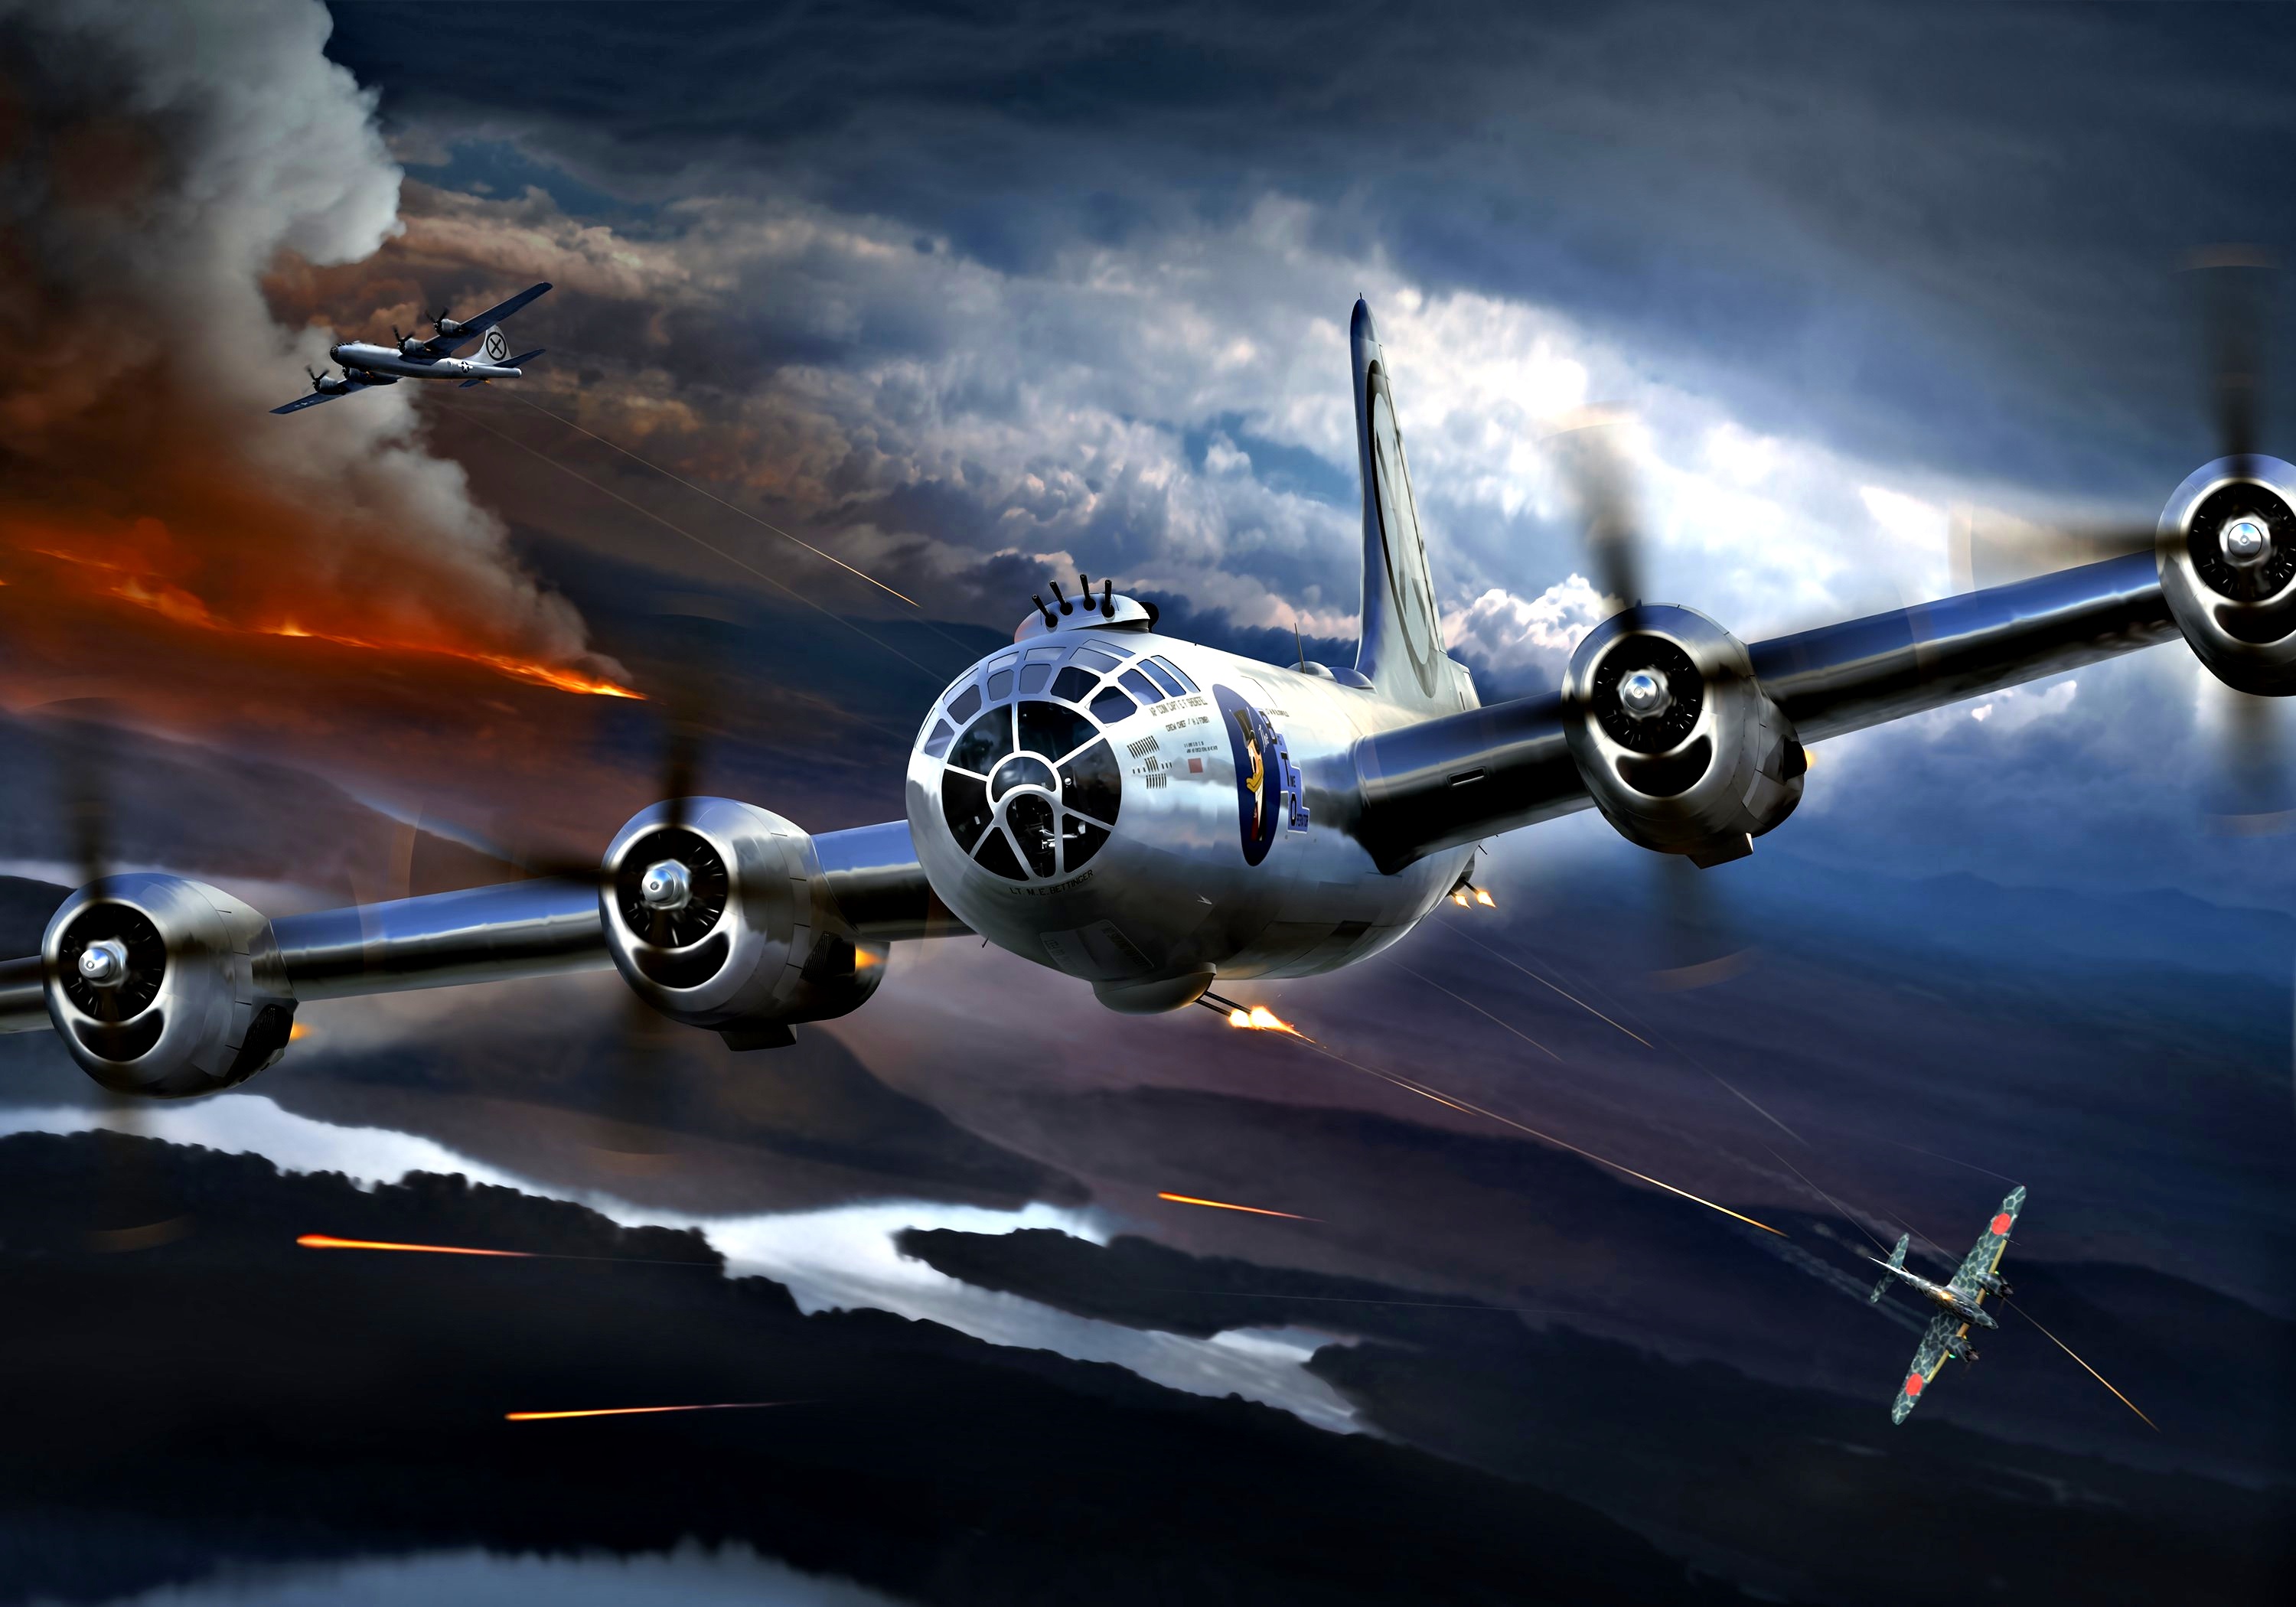 General 3000x2100 Boeing B-29 Superfortress artwork military aircraft military aircraft military vehicle vehicle American aircraft Boeing frontal view clouds